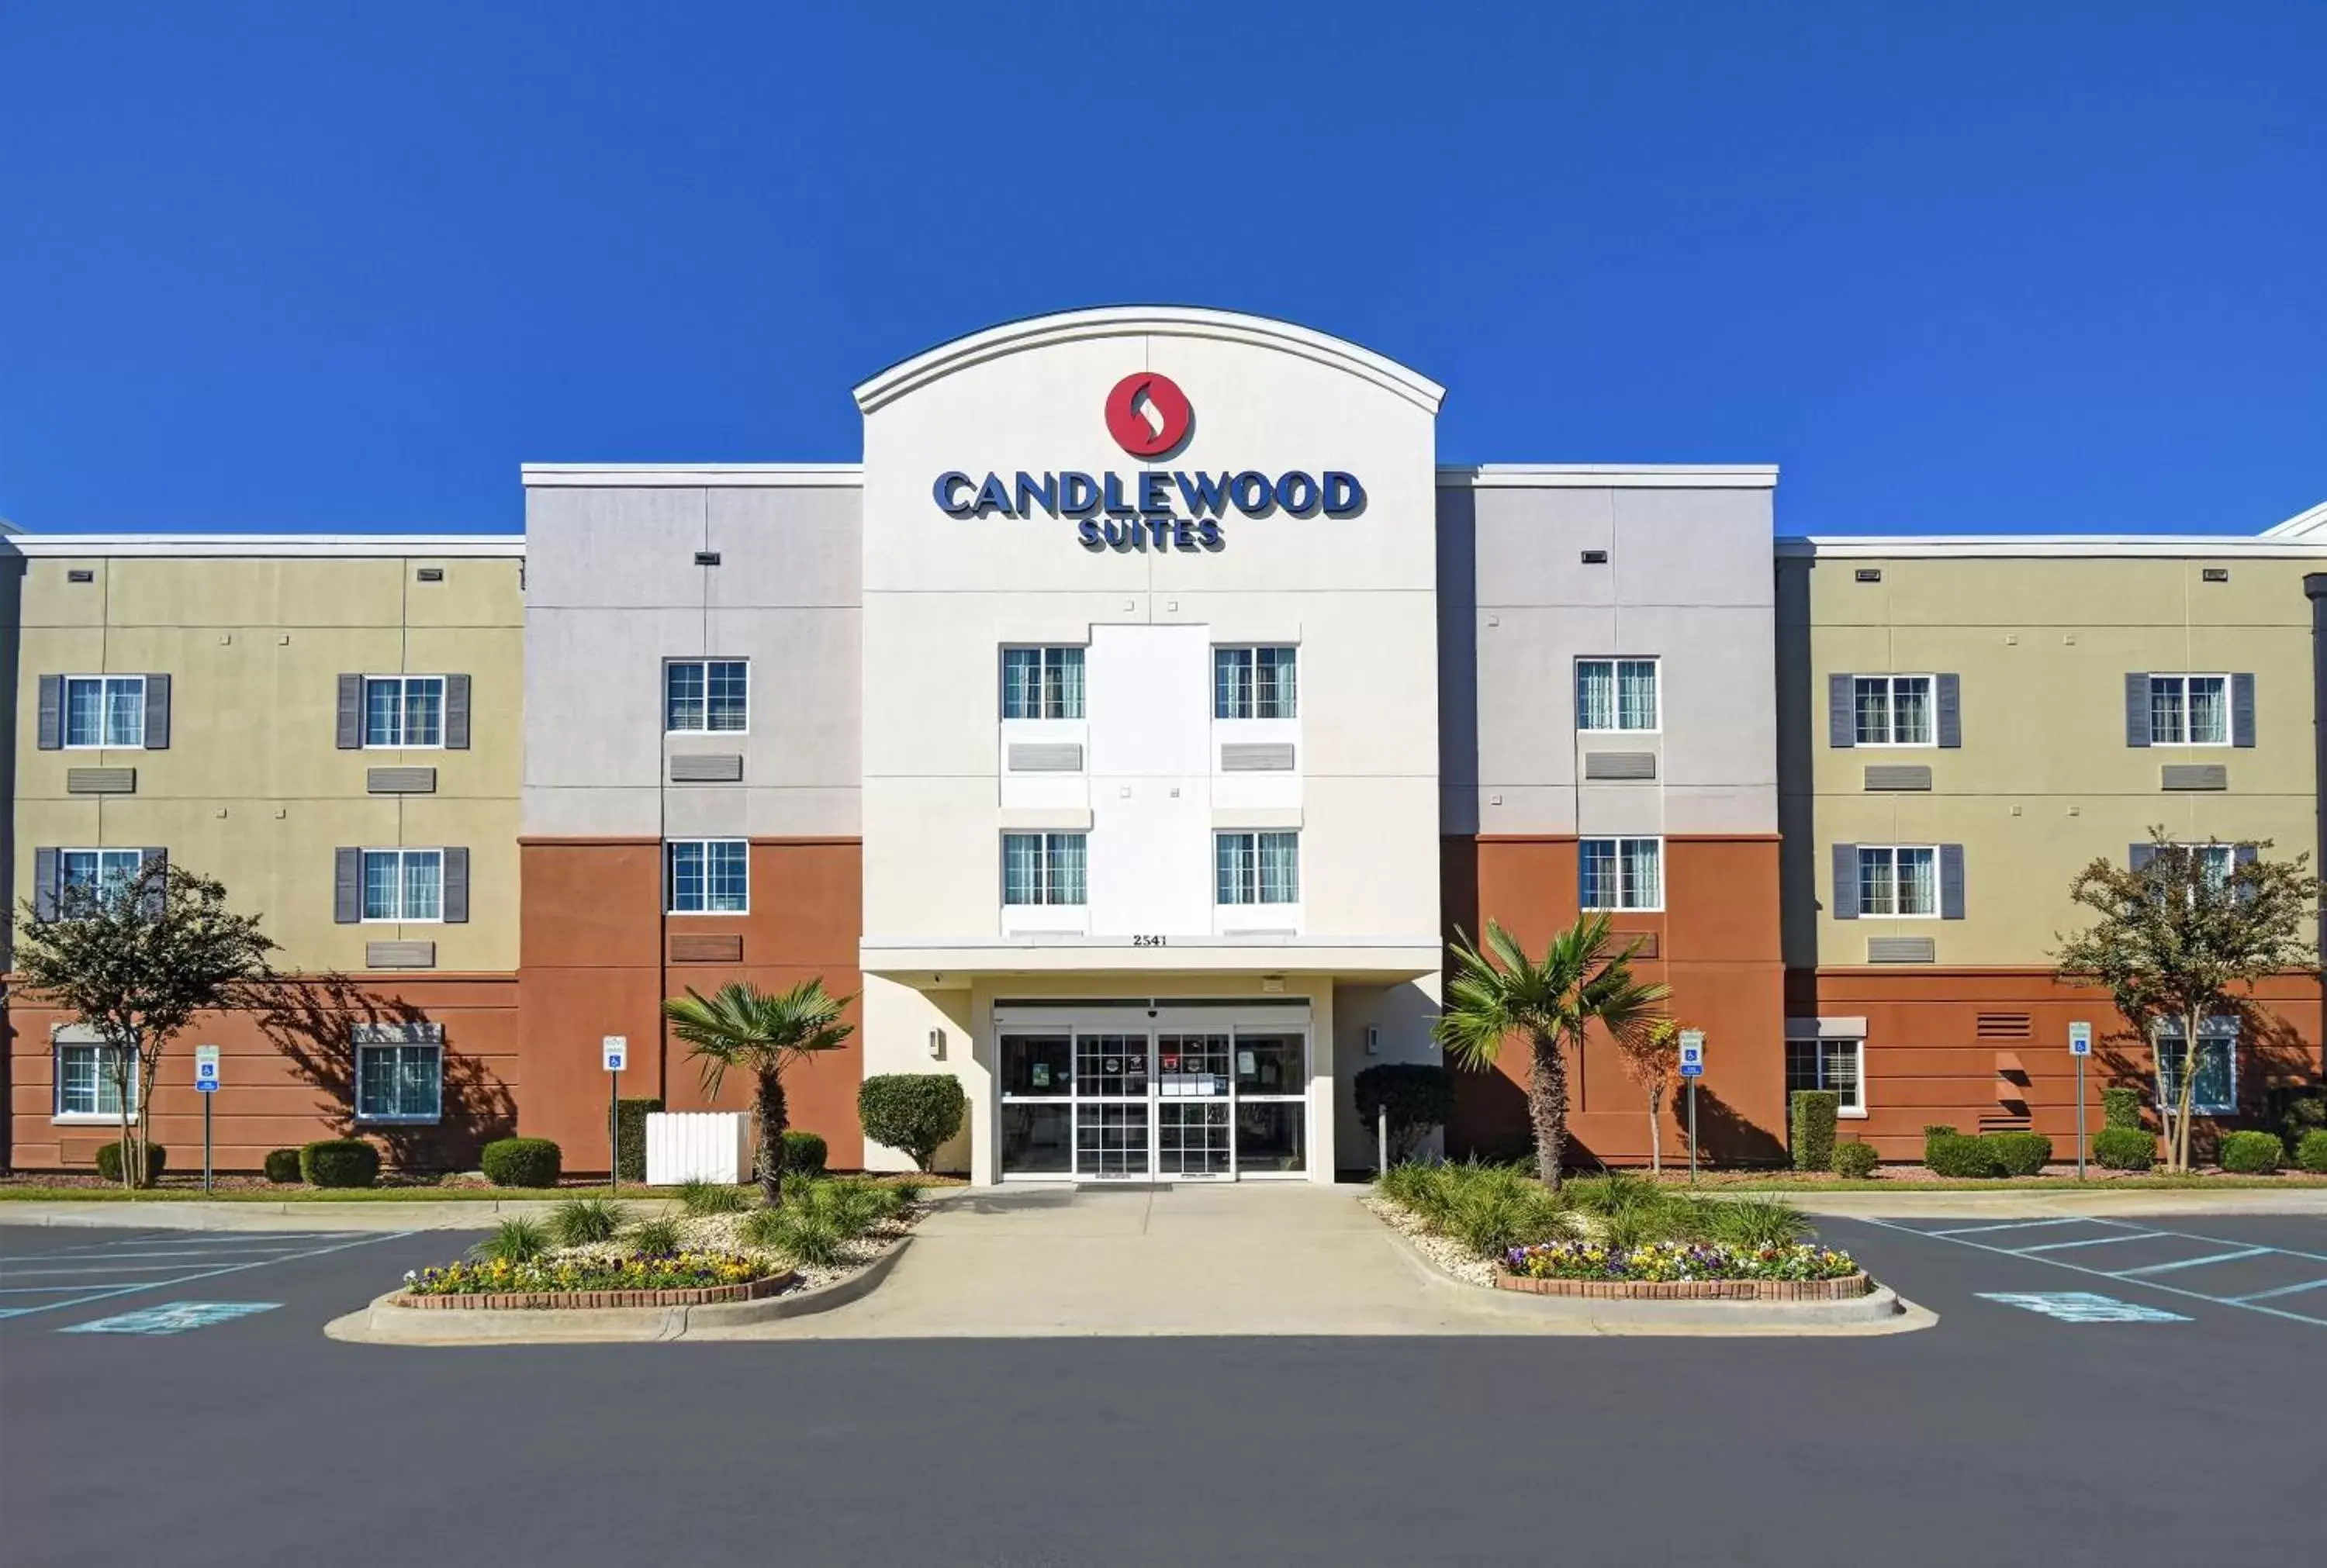 Property building in Candlewood Suites Sumter, an IHG Hotel